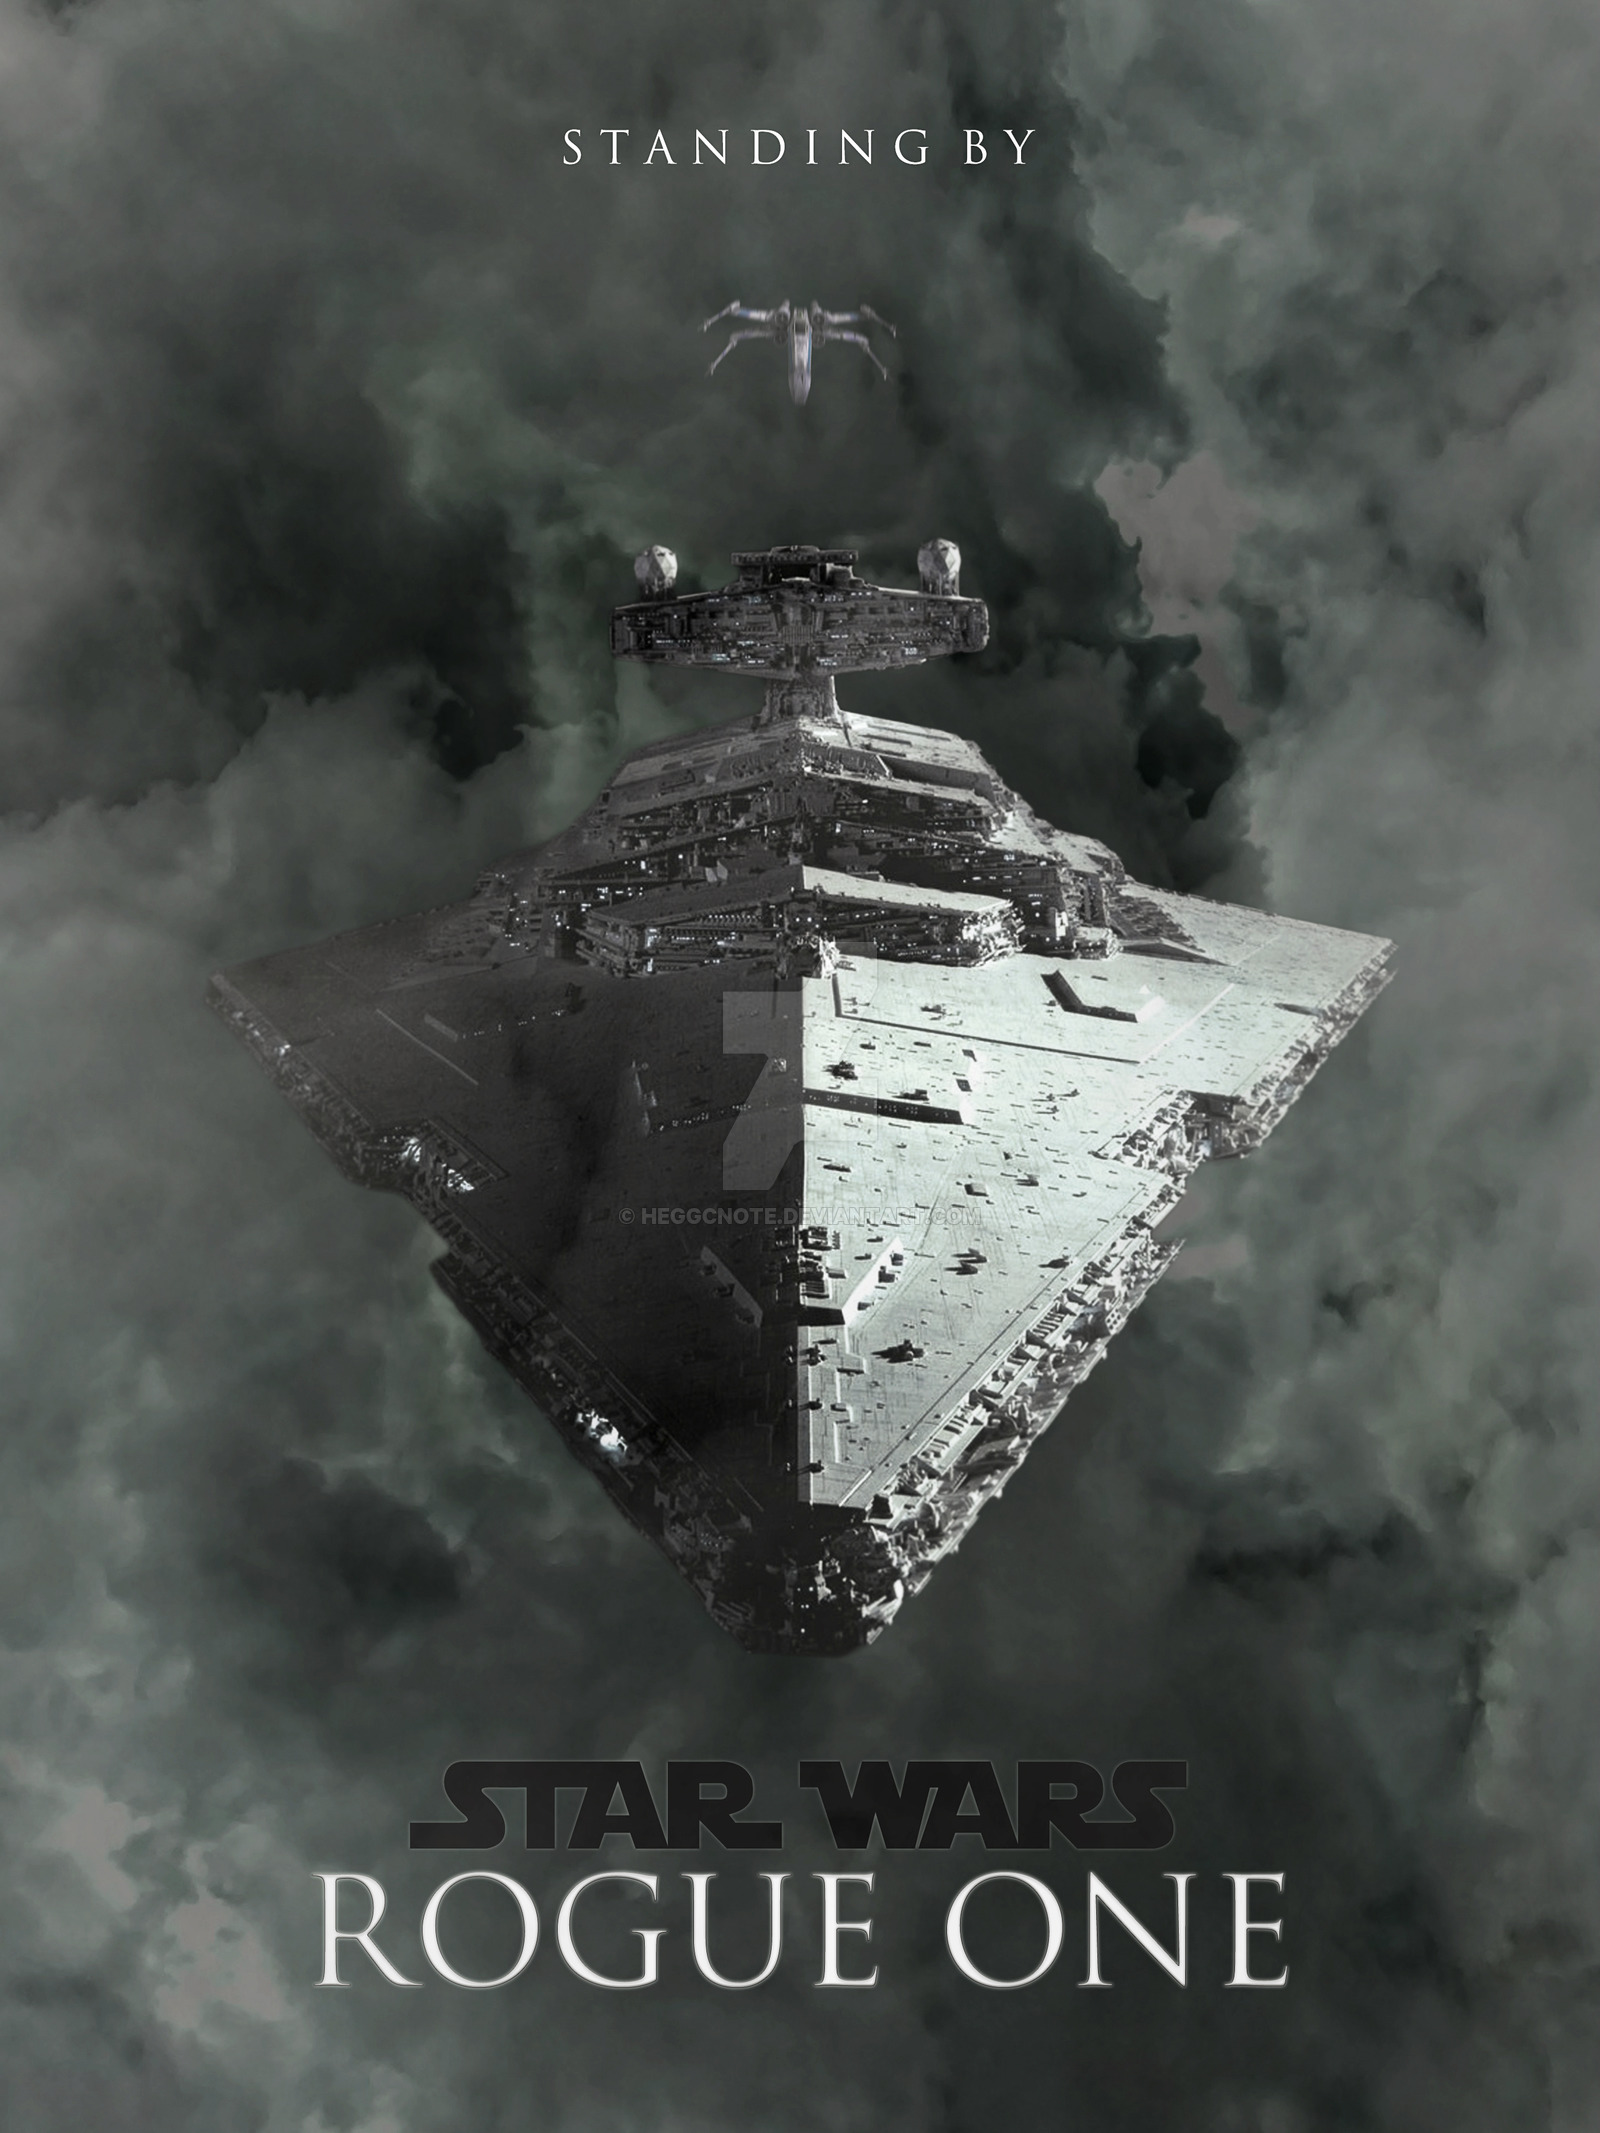 Star Wars Rogue One Fan Poster By Heggcnote